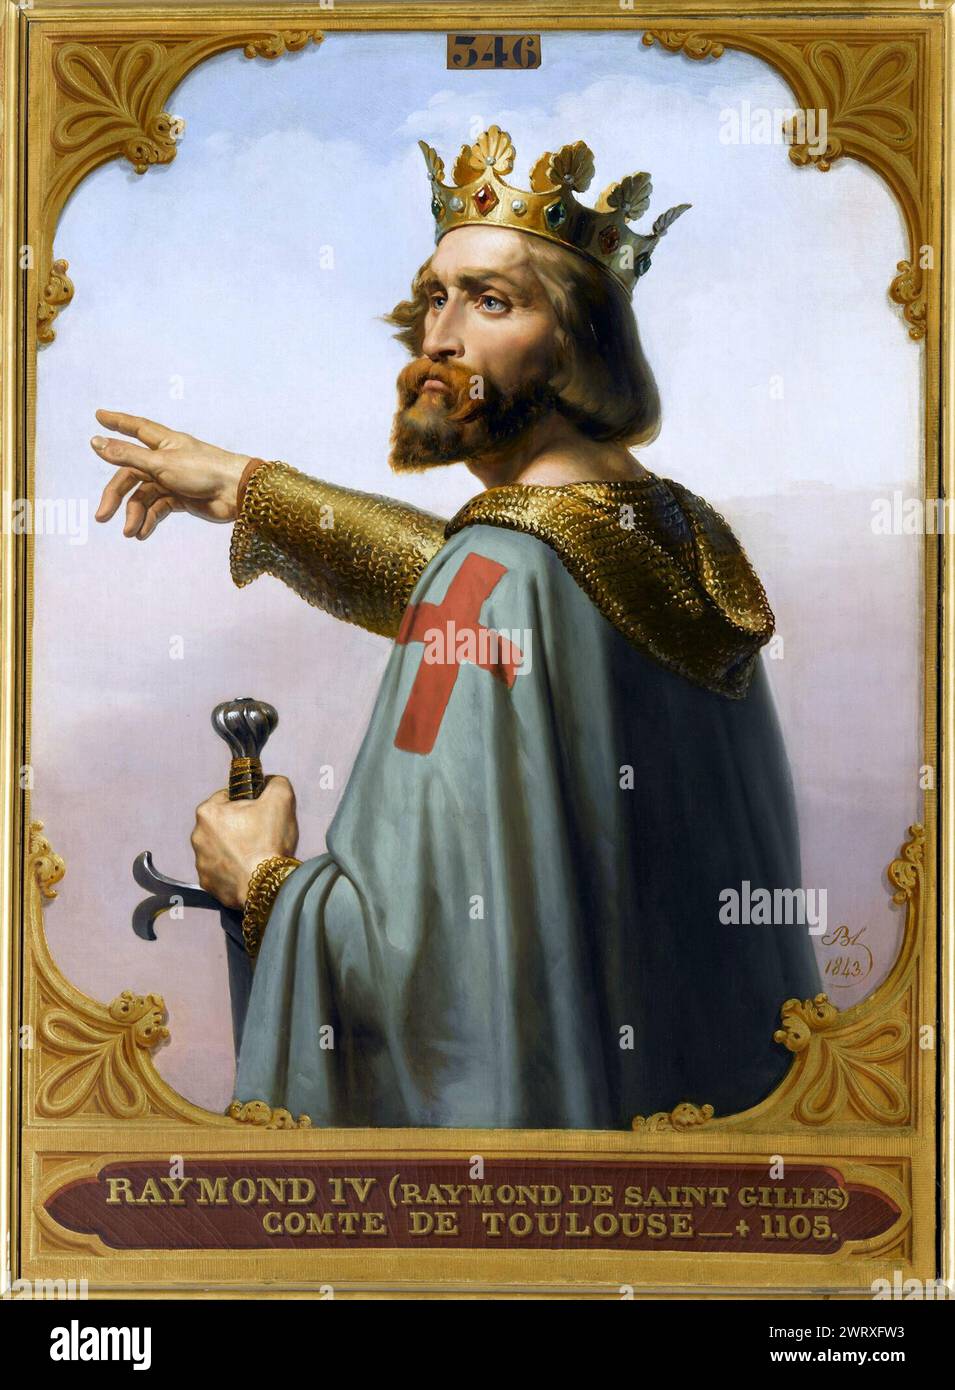 Raymond of Saint-Gilles (1041 – 1105), Raymond IV of Toulouse or Raymond I of Tripoli, count of Toulouse, duke of Narbonne, and one of the leaders of the First Crusade from 1096 to 1099. 19th-century depiction of Raymond IV, Count of Toulouse by Merry-Joseph Blondel. Stock Photo